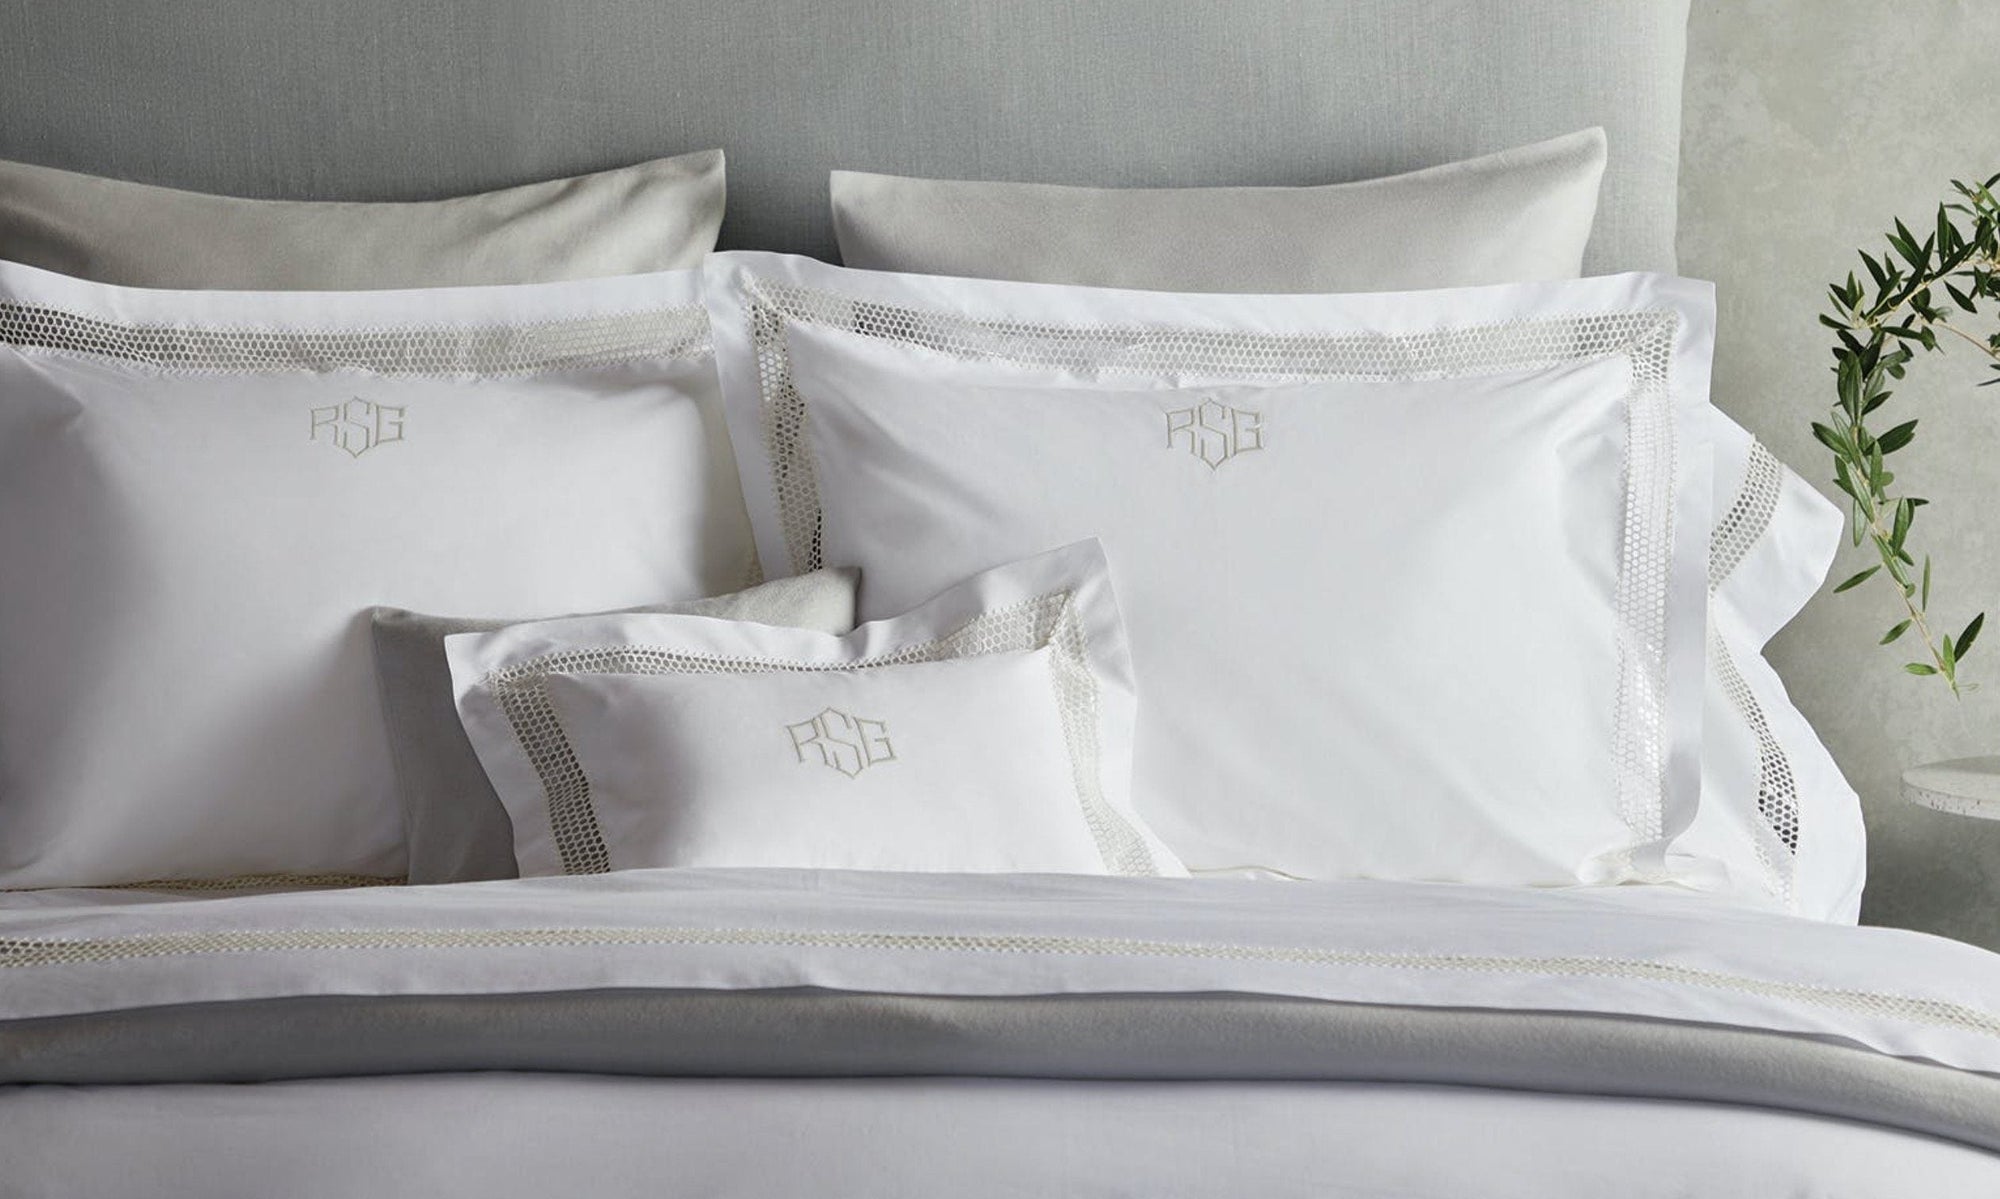 Cecily by Matouk - Giza Percale with Lace inset bedding at fig Linens and home